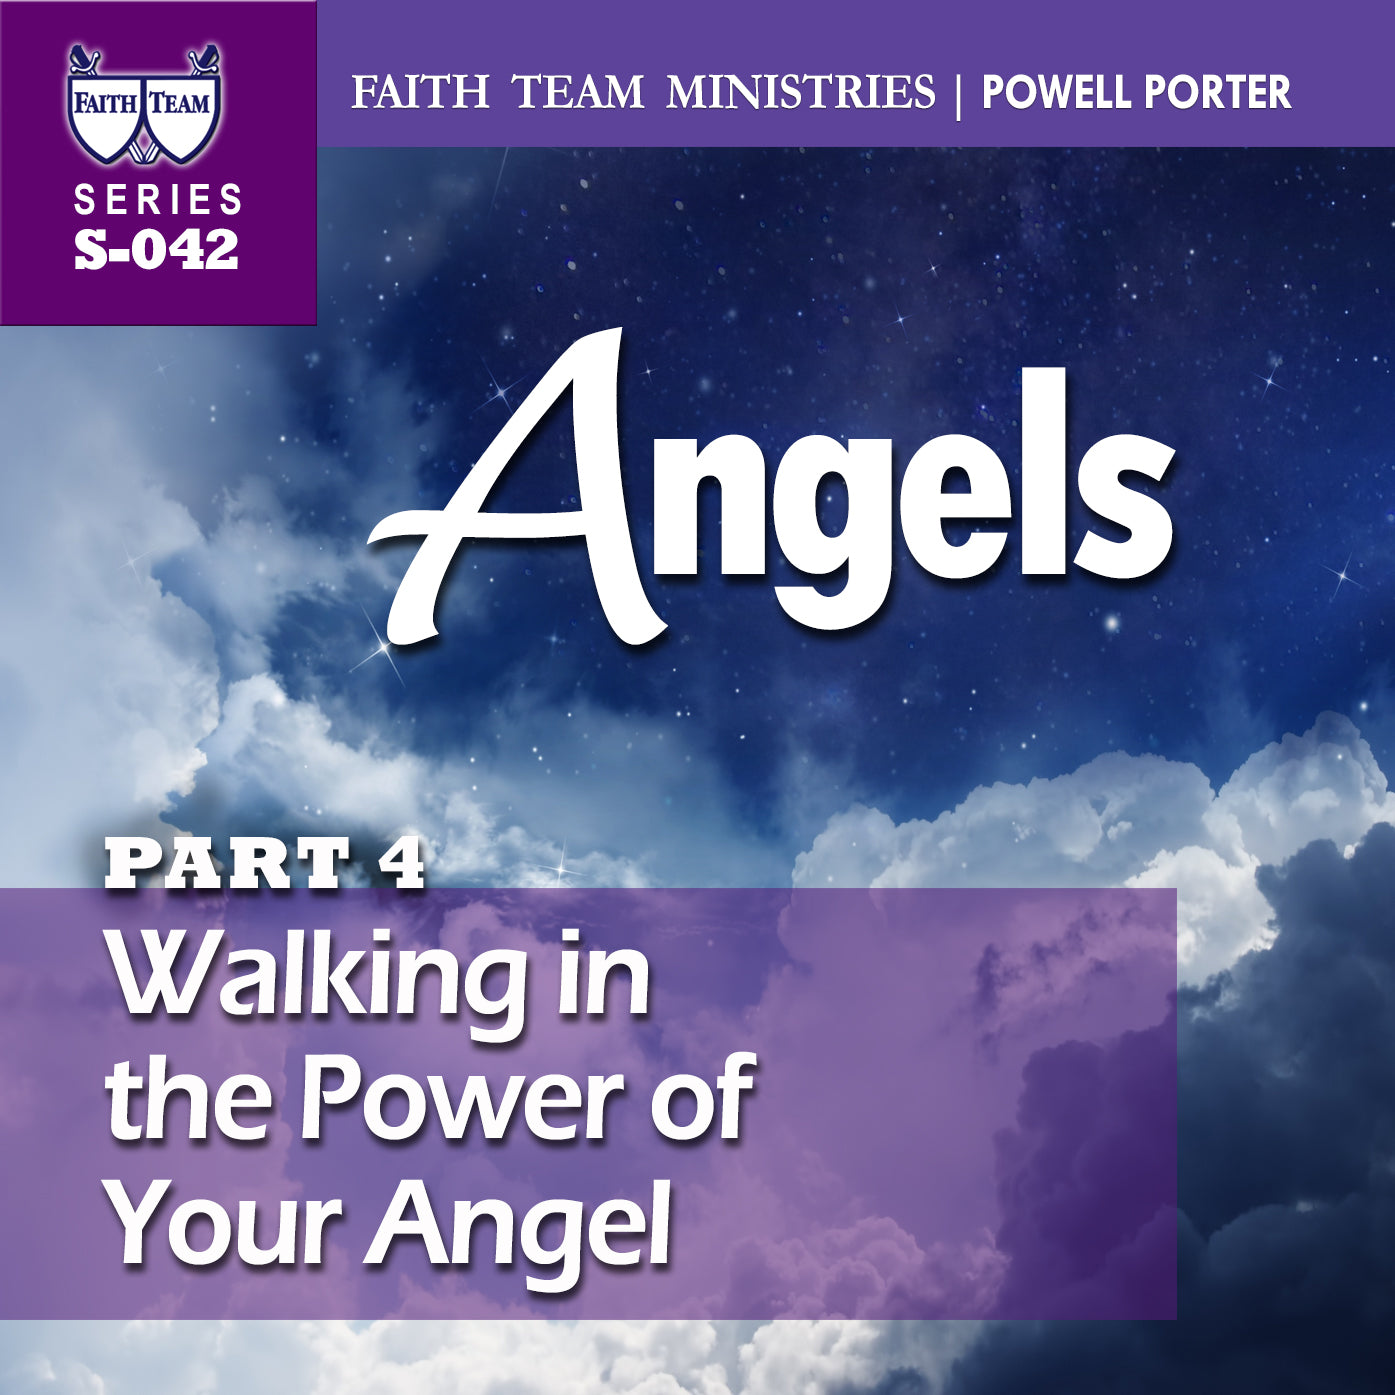 ANGELS | Part 4: Walking in the Power of Your Angel